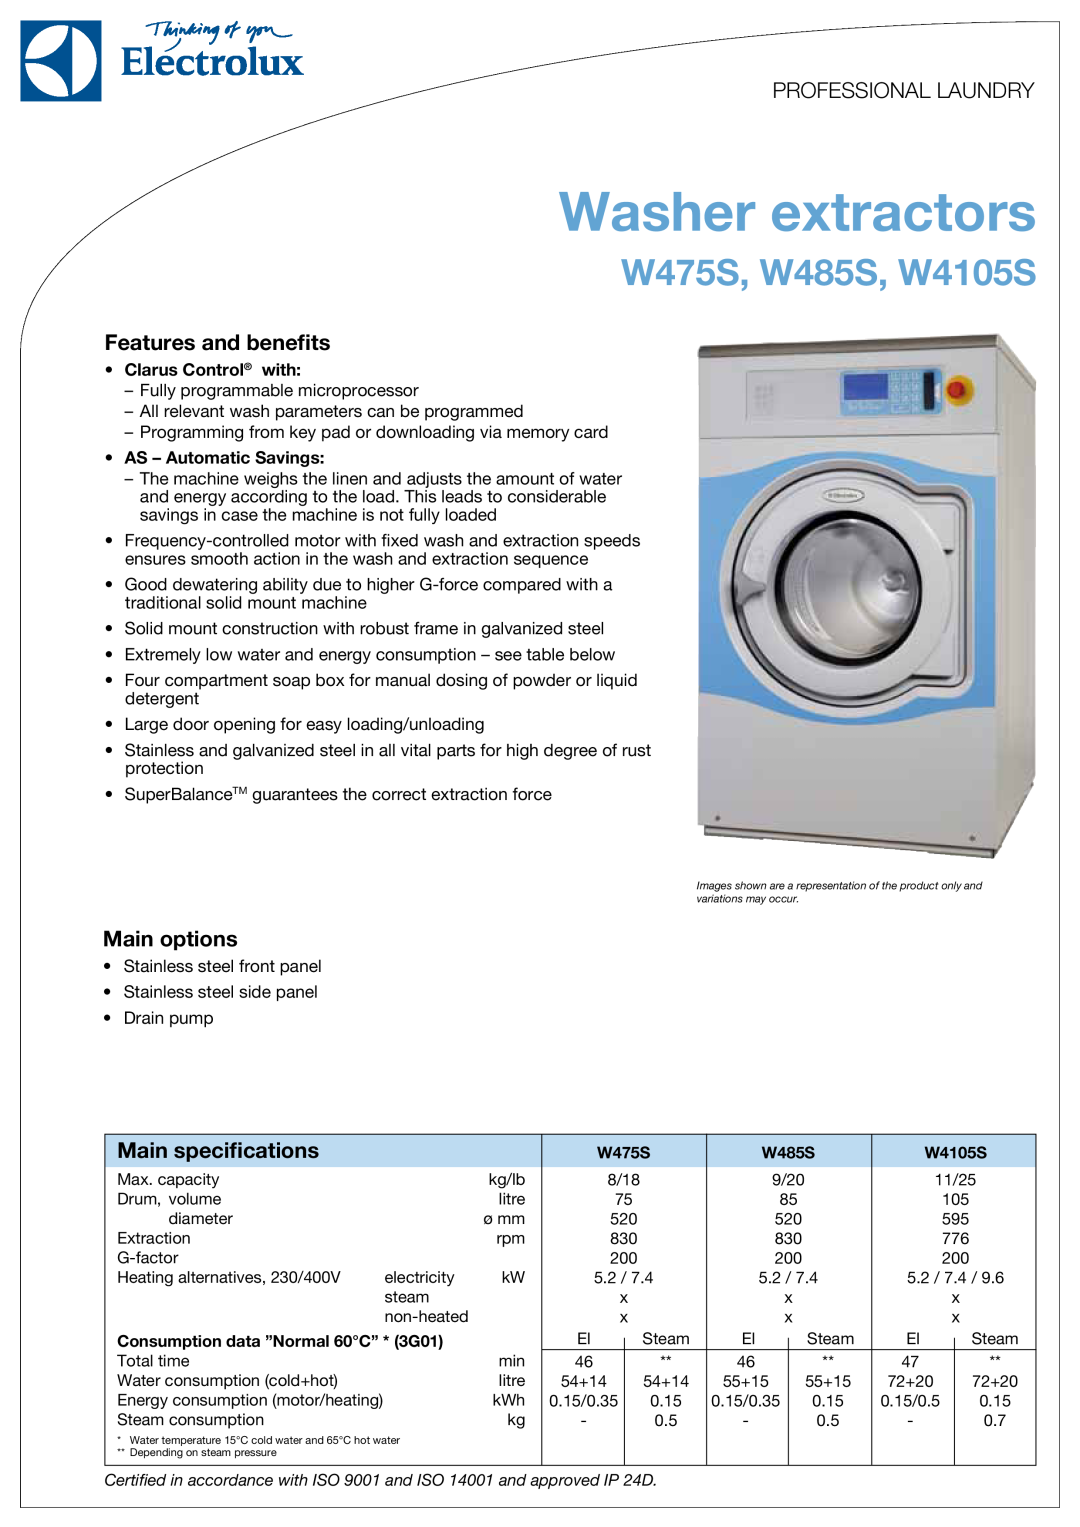 Electrolux specifications Washer extractors, W475S, W485S, W4105S, Professional Laundry, Features and benefits 